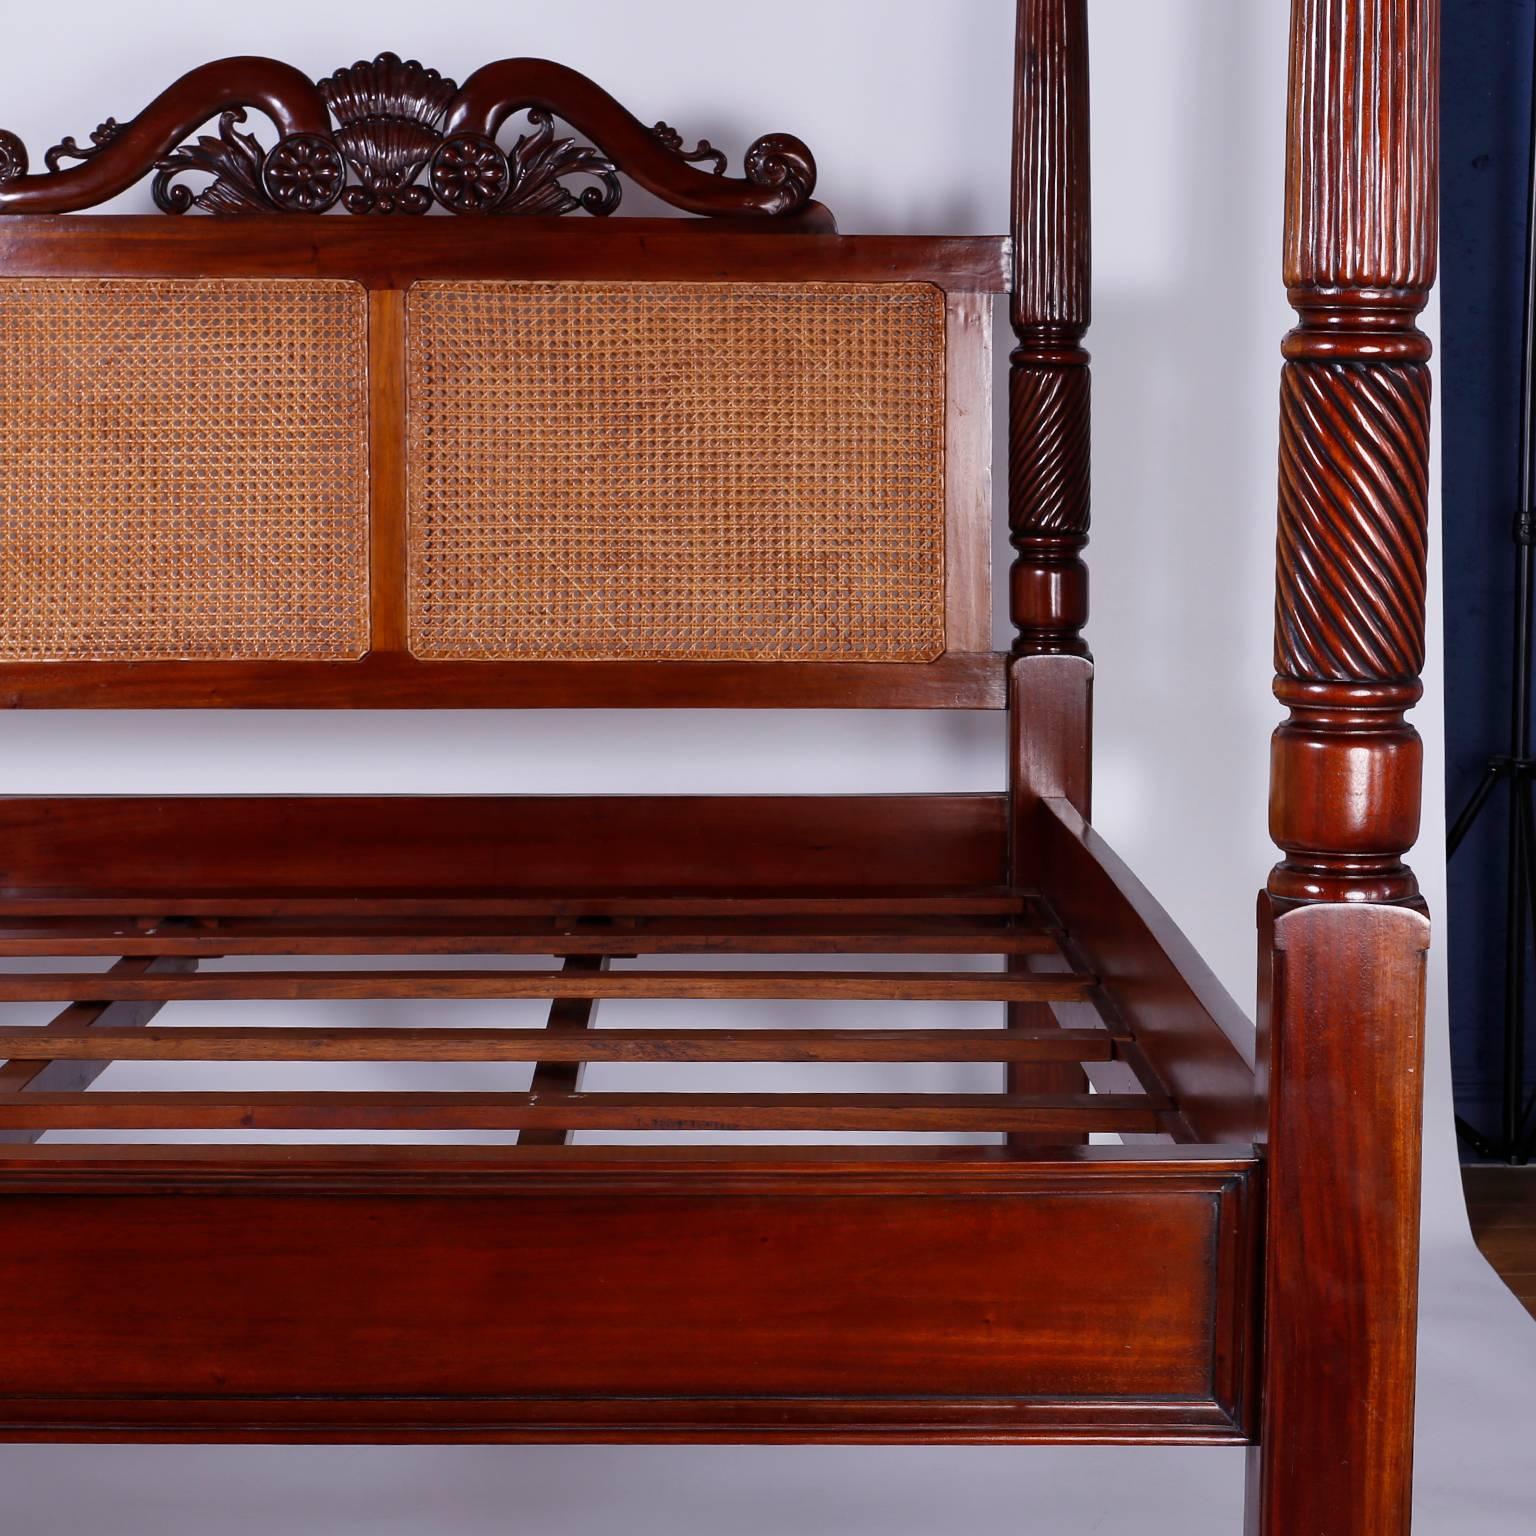 American British Colonial West Indies Style Queen-Size Canopy Bed